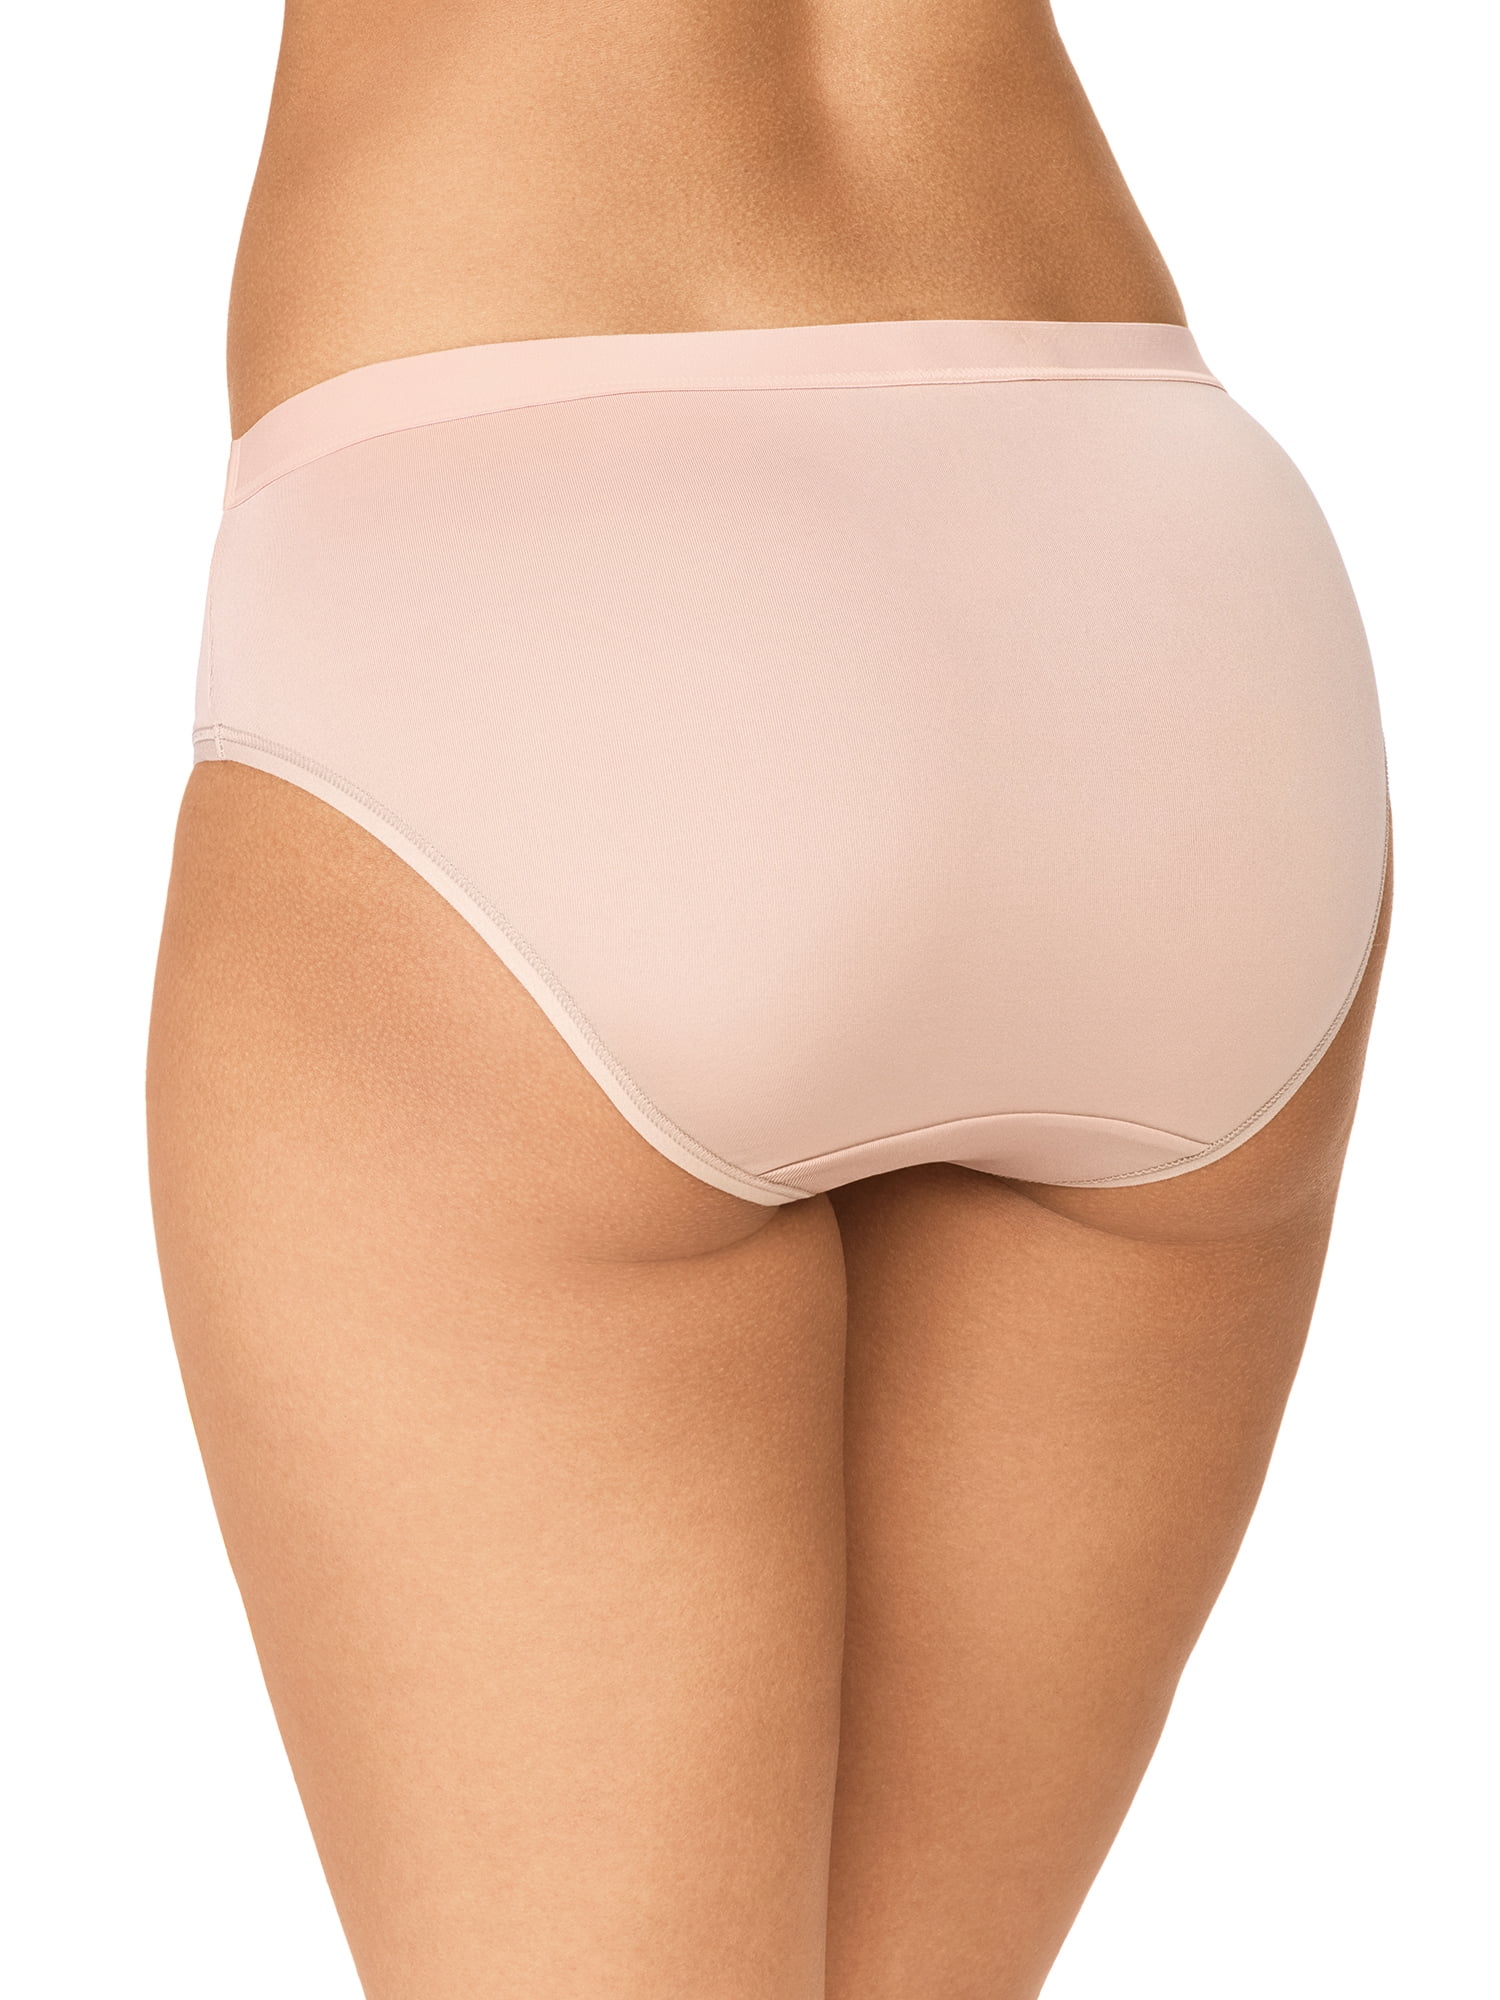 NWTS VASSARETTE SIZE 7 HIPSTER PANTIES PANTY COLOR CHOCOLATE KISS STYLE  12309